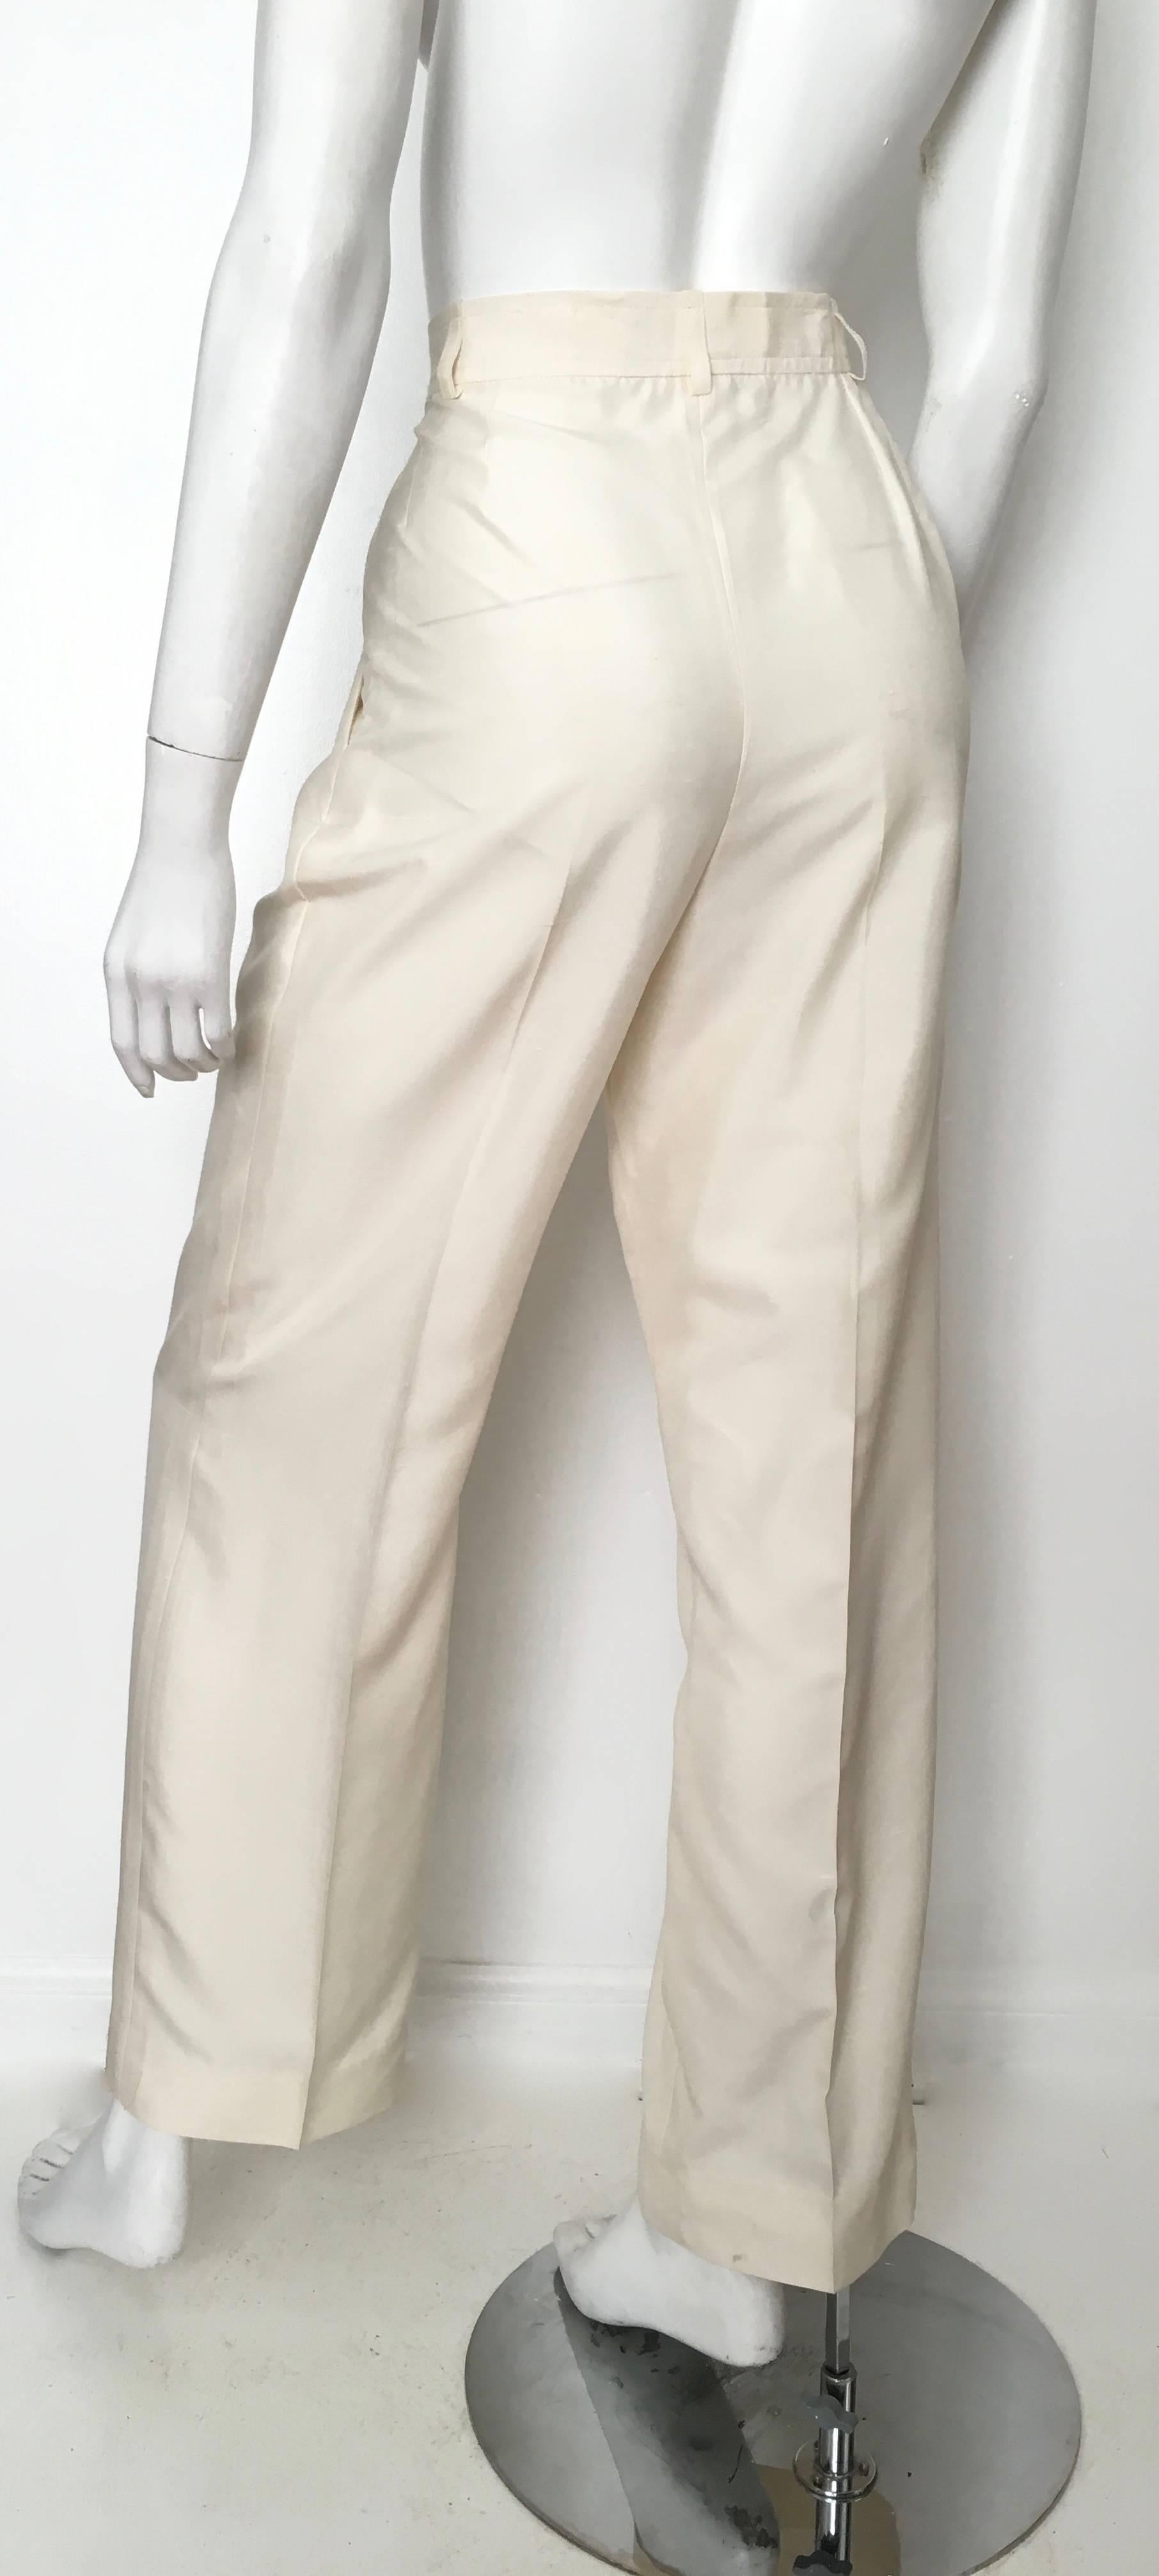 Yves Saint Laurent 1980s Cream Silk Pants with Pockets Size 8. at 1stDibs